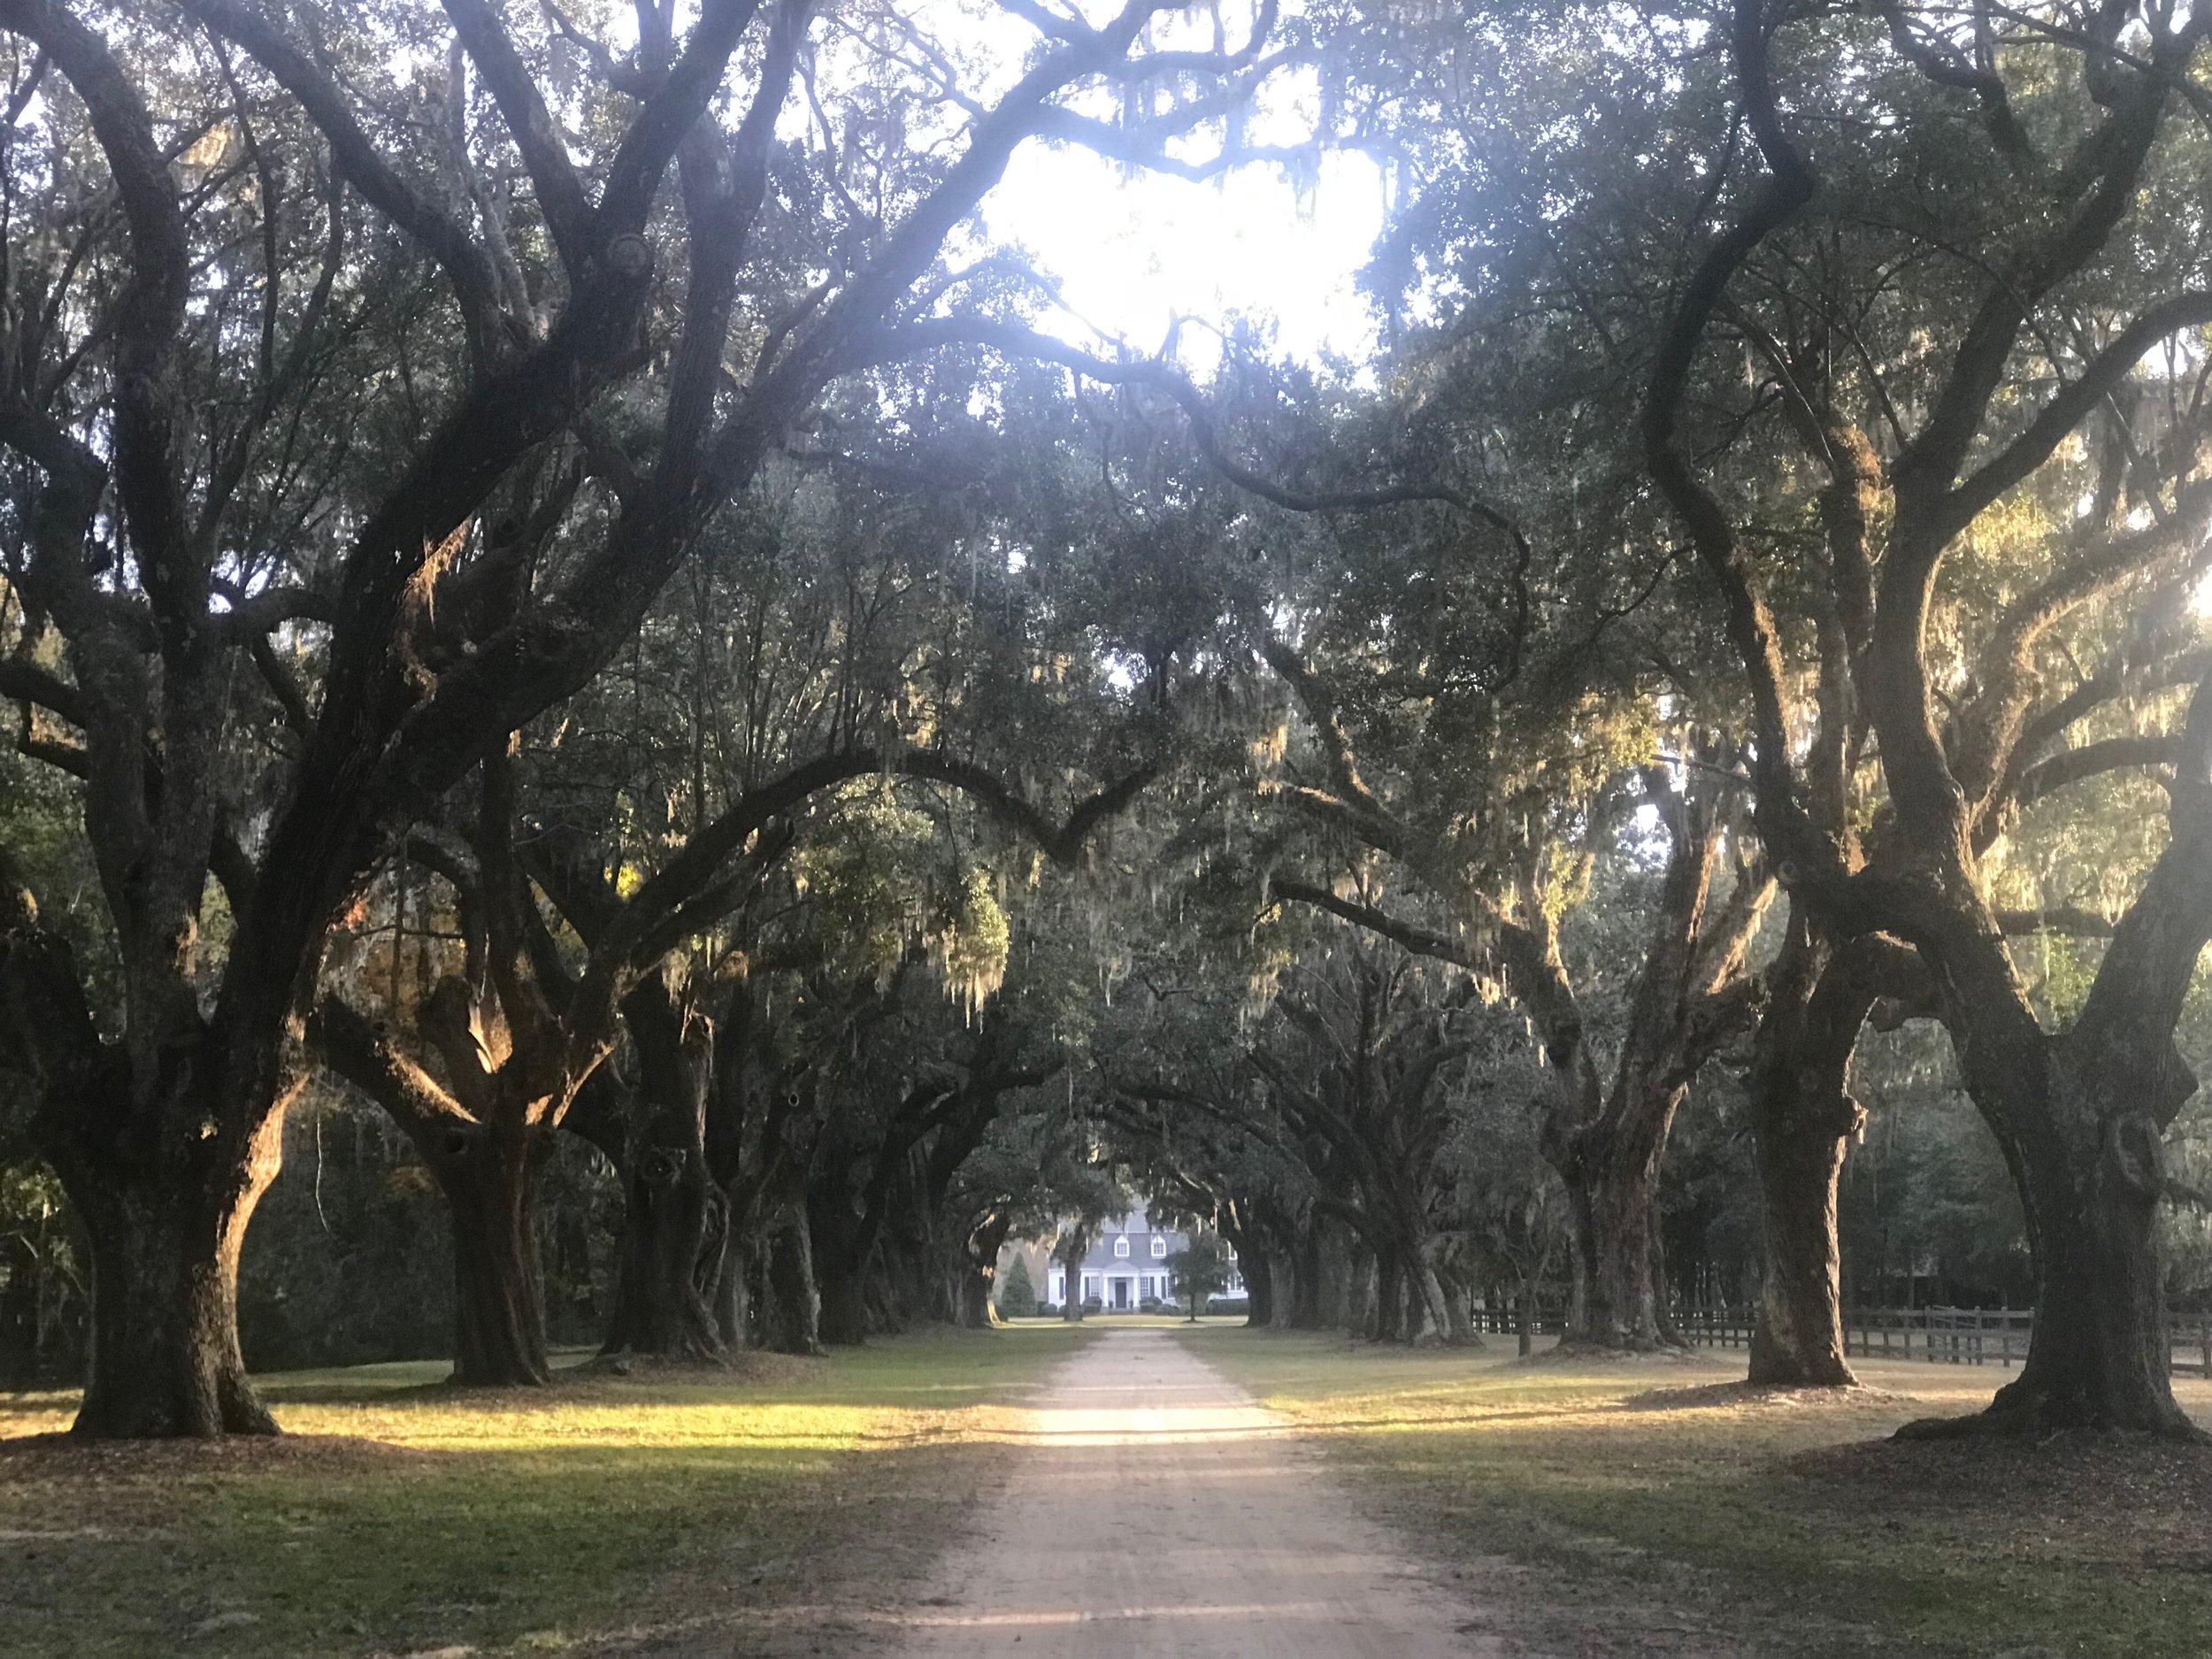  The entrance to the Oakland Plantation in Mount Pleasant, SC. 